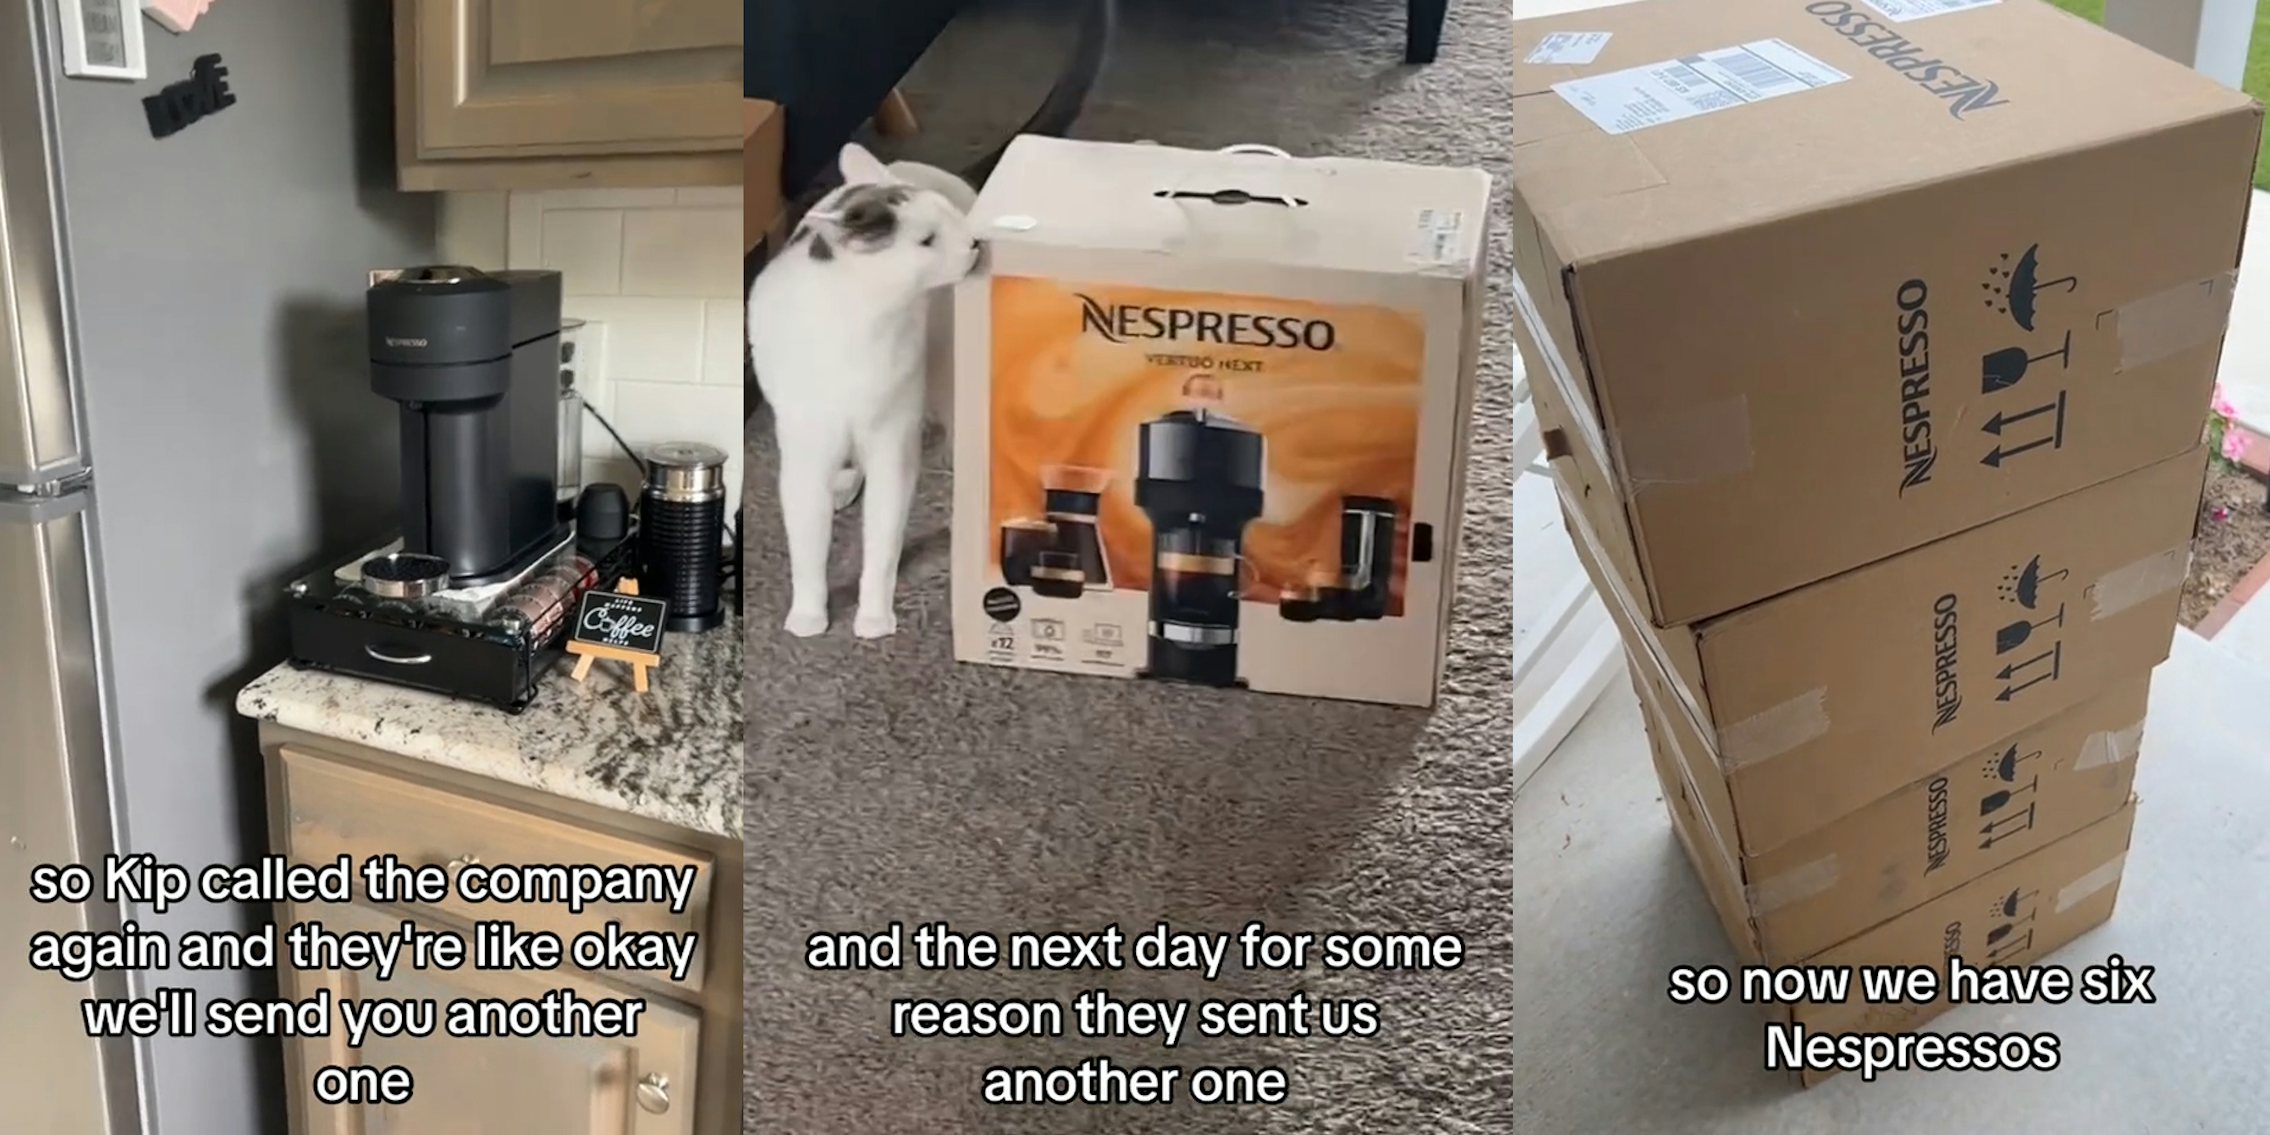 Nepresso machine on counter with caption 'so Kip called the company again and they're like okay we'll send you another one' (l) Nepresso machine on floor with cat with caption 'and the next day for some reason they sent us another one' (c) Nepresso machines in boxes with caption 'so now we have six Nepressos' (r)